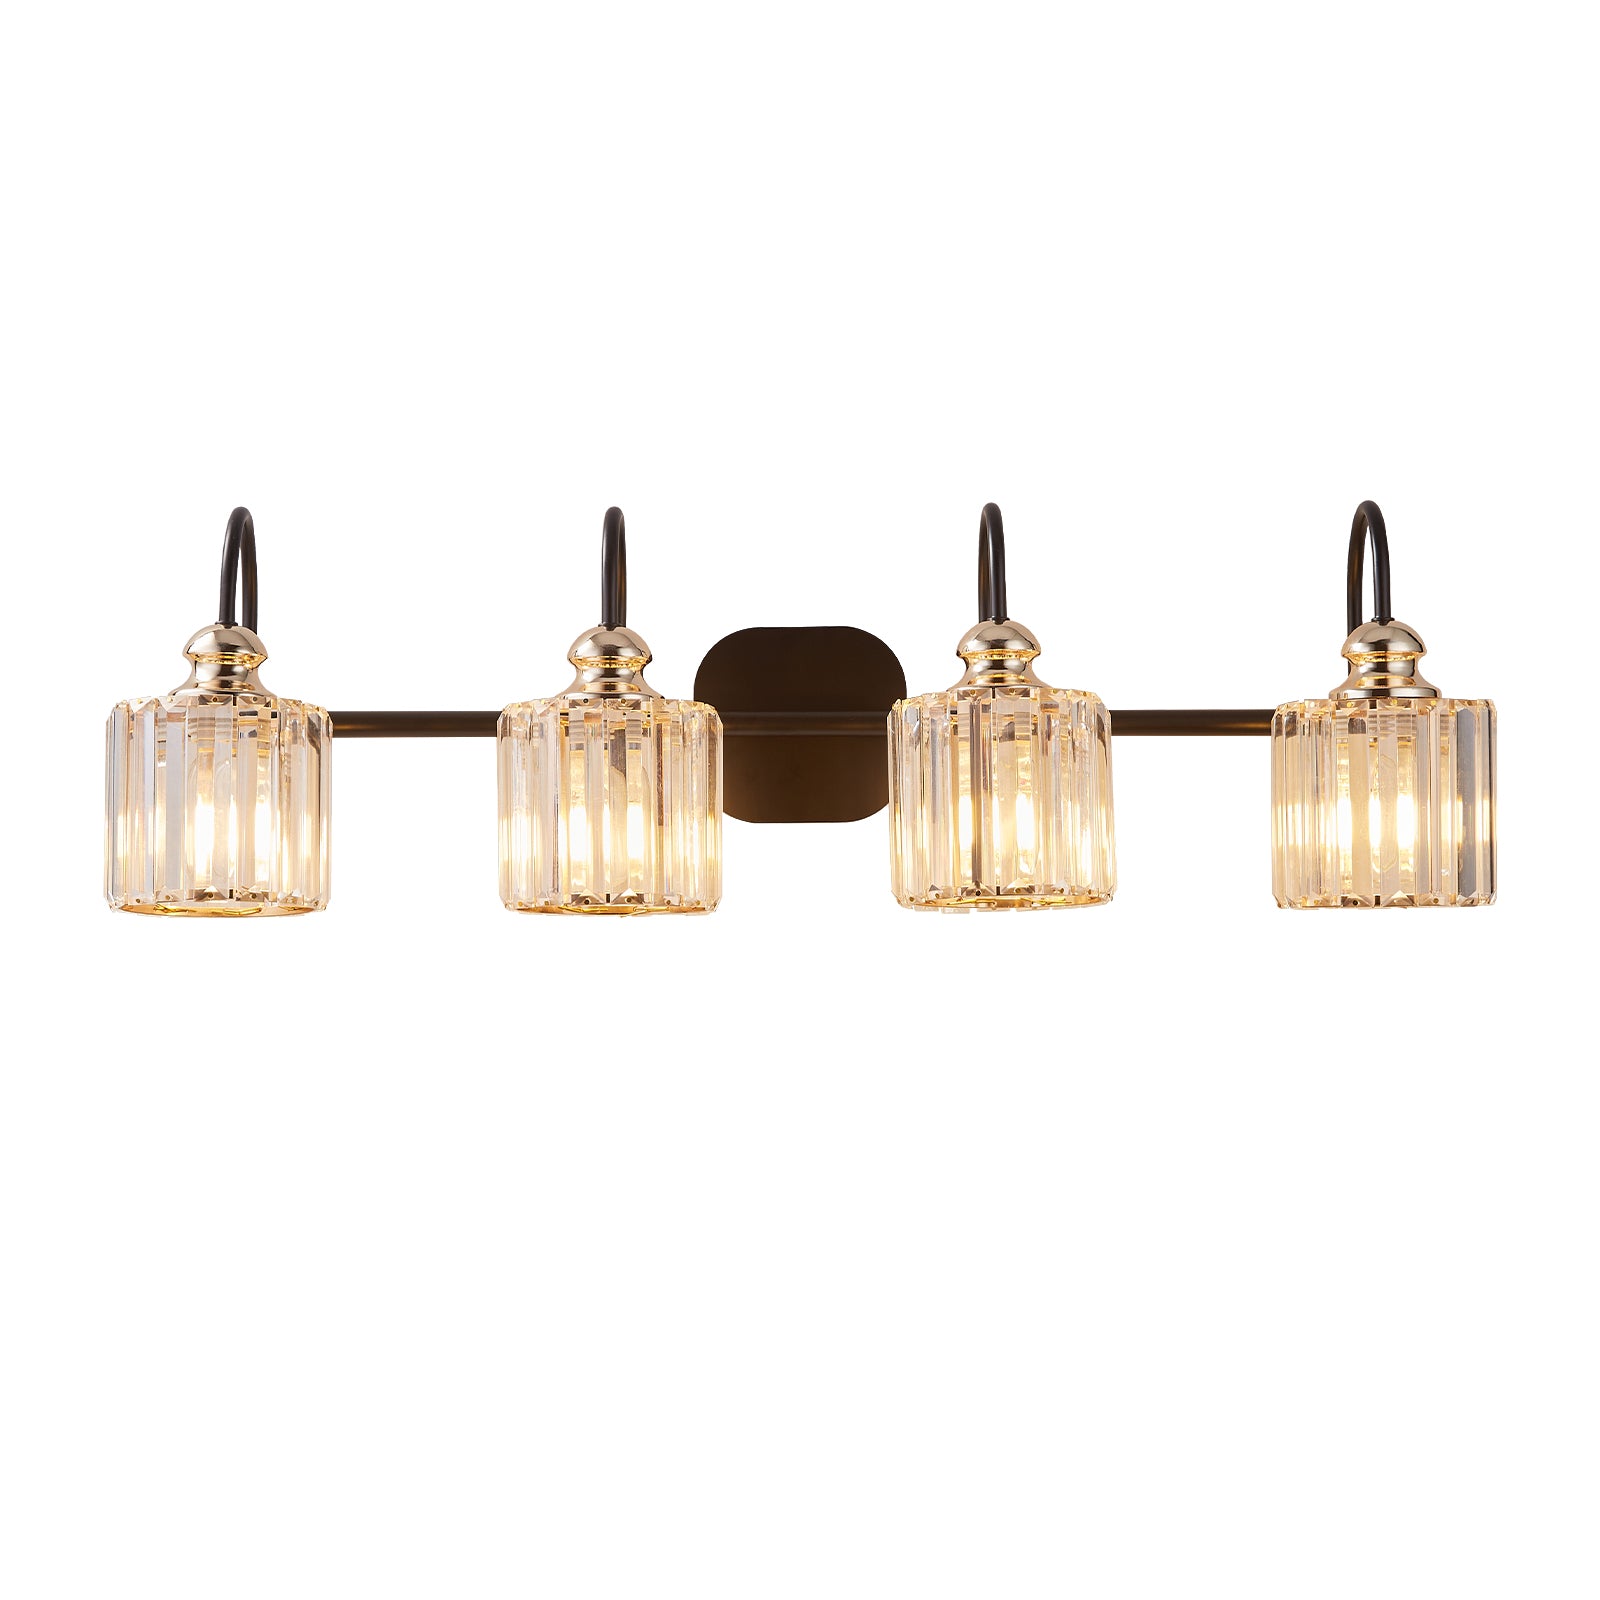 Modern Vanity Lights Wall Sconce 4 Heads Brushed Nickel Bathroom Lighting Fixtures Over Mirror with Clear Glass Shade-Boyel Living